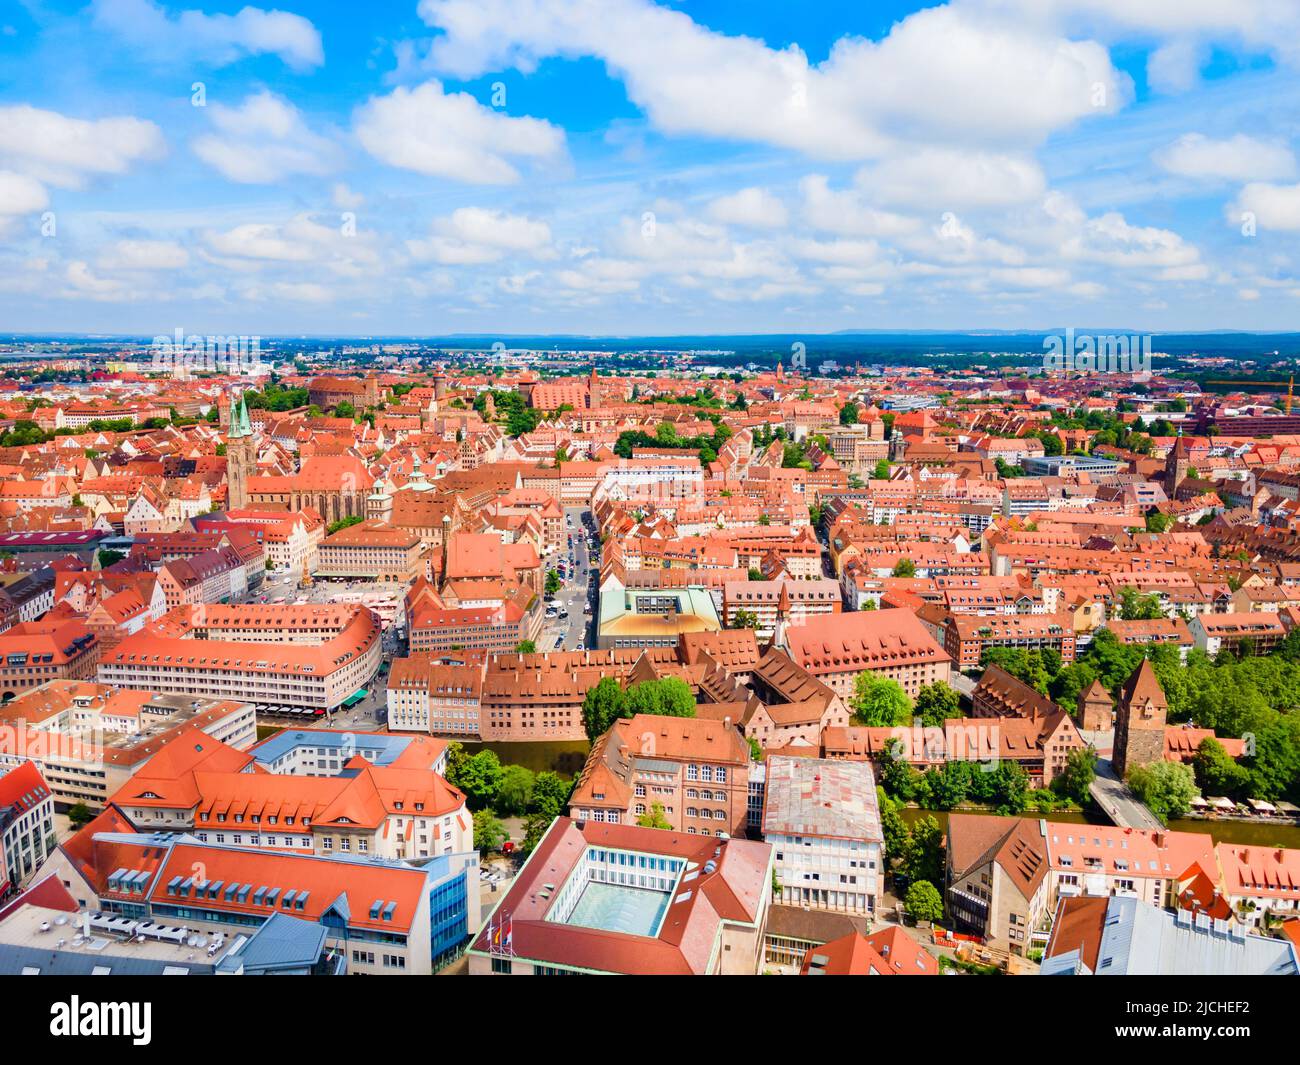 Nuremberg old town aerial panoramic view. Nuremberg is the second largest city of Bavaria state in Germany. Stock Photo